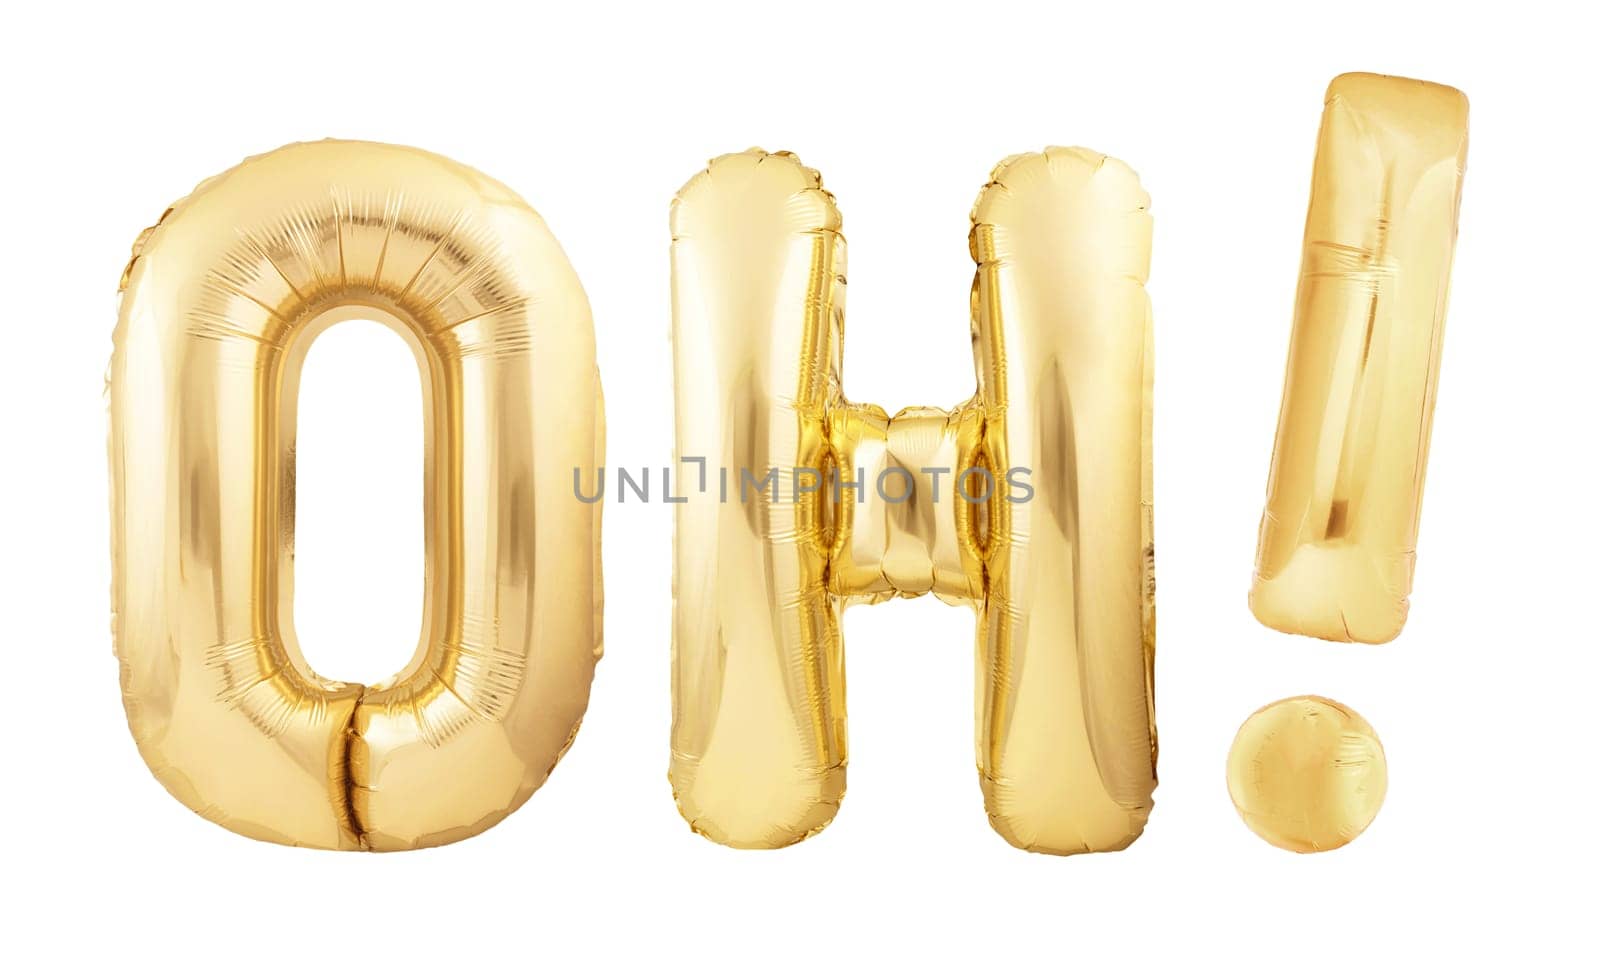 Oh! interjection with exclamation mark made of golden inflatable balloons isolated on white background.